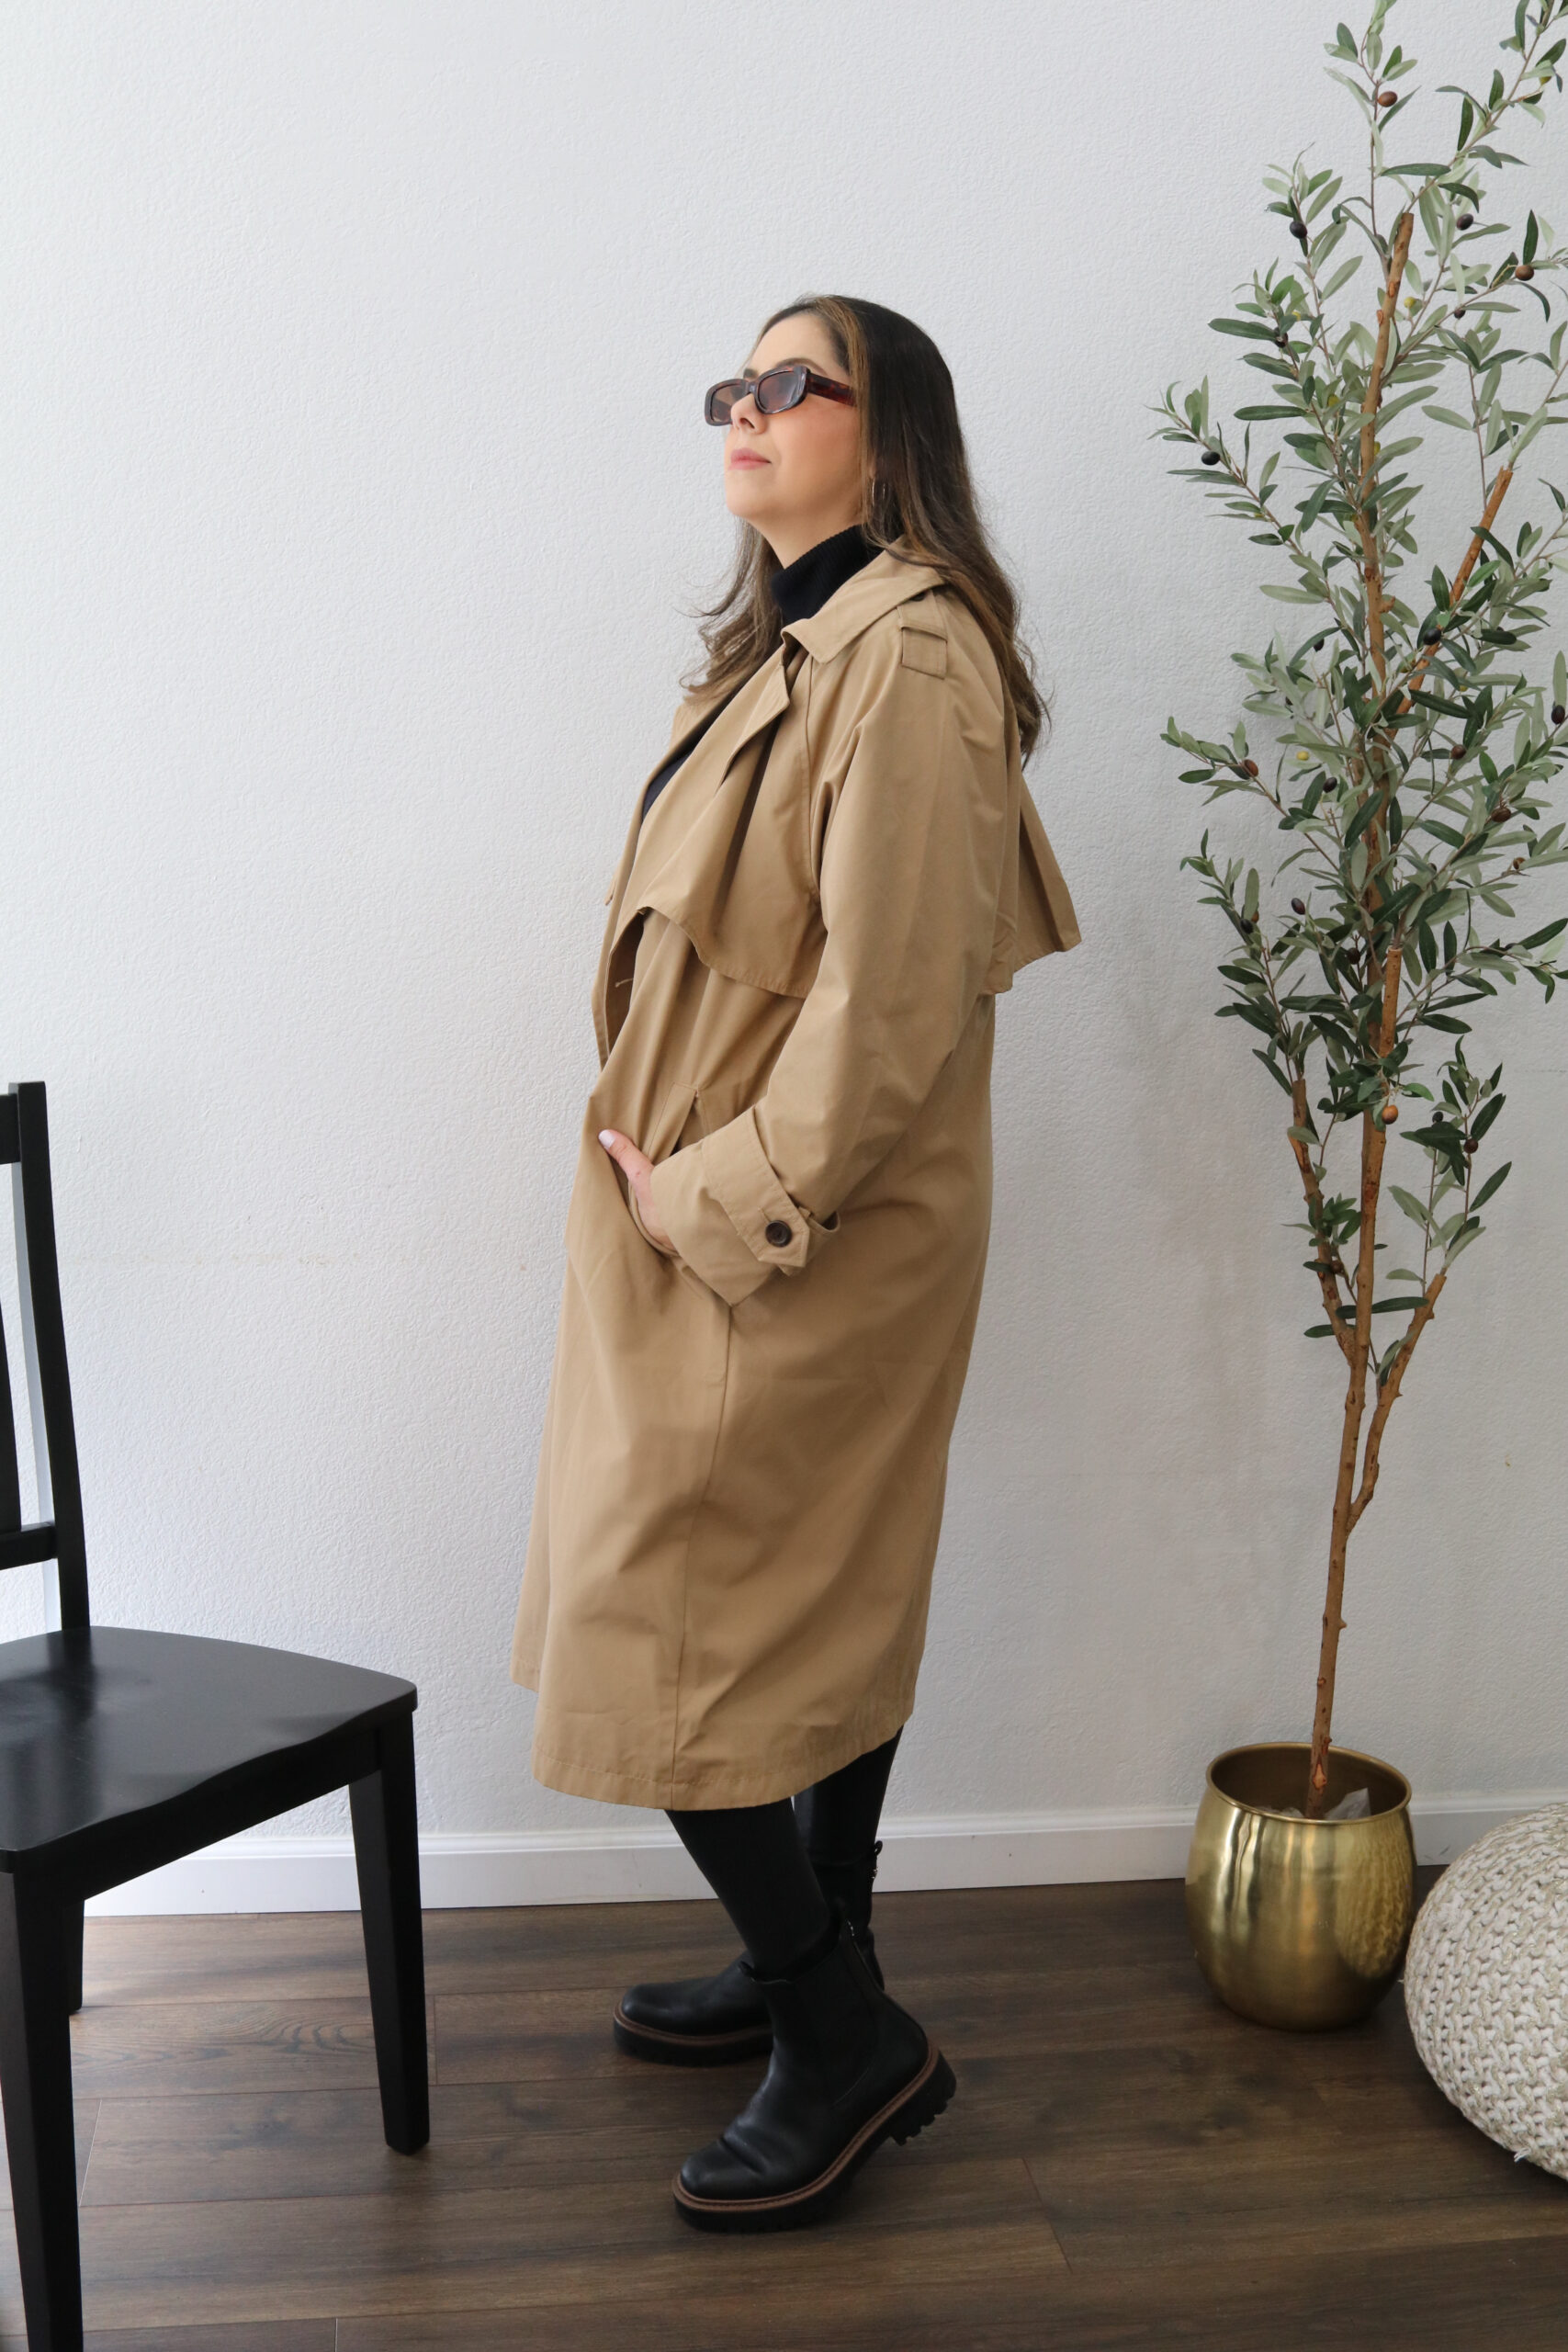 how to style a trench coat with chelsea boots, chic rainy day outfit, chic outfit for women over 35